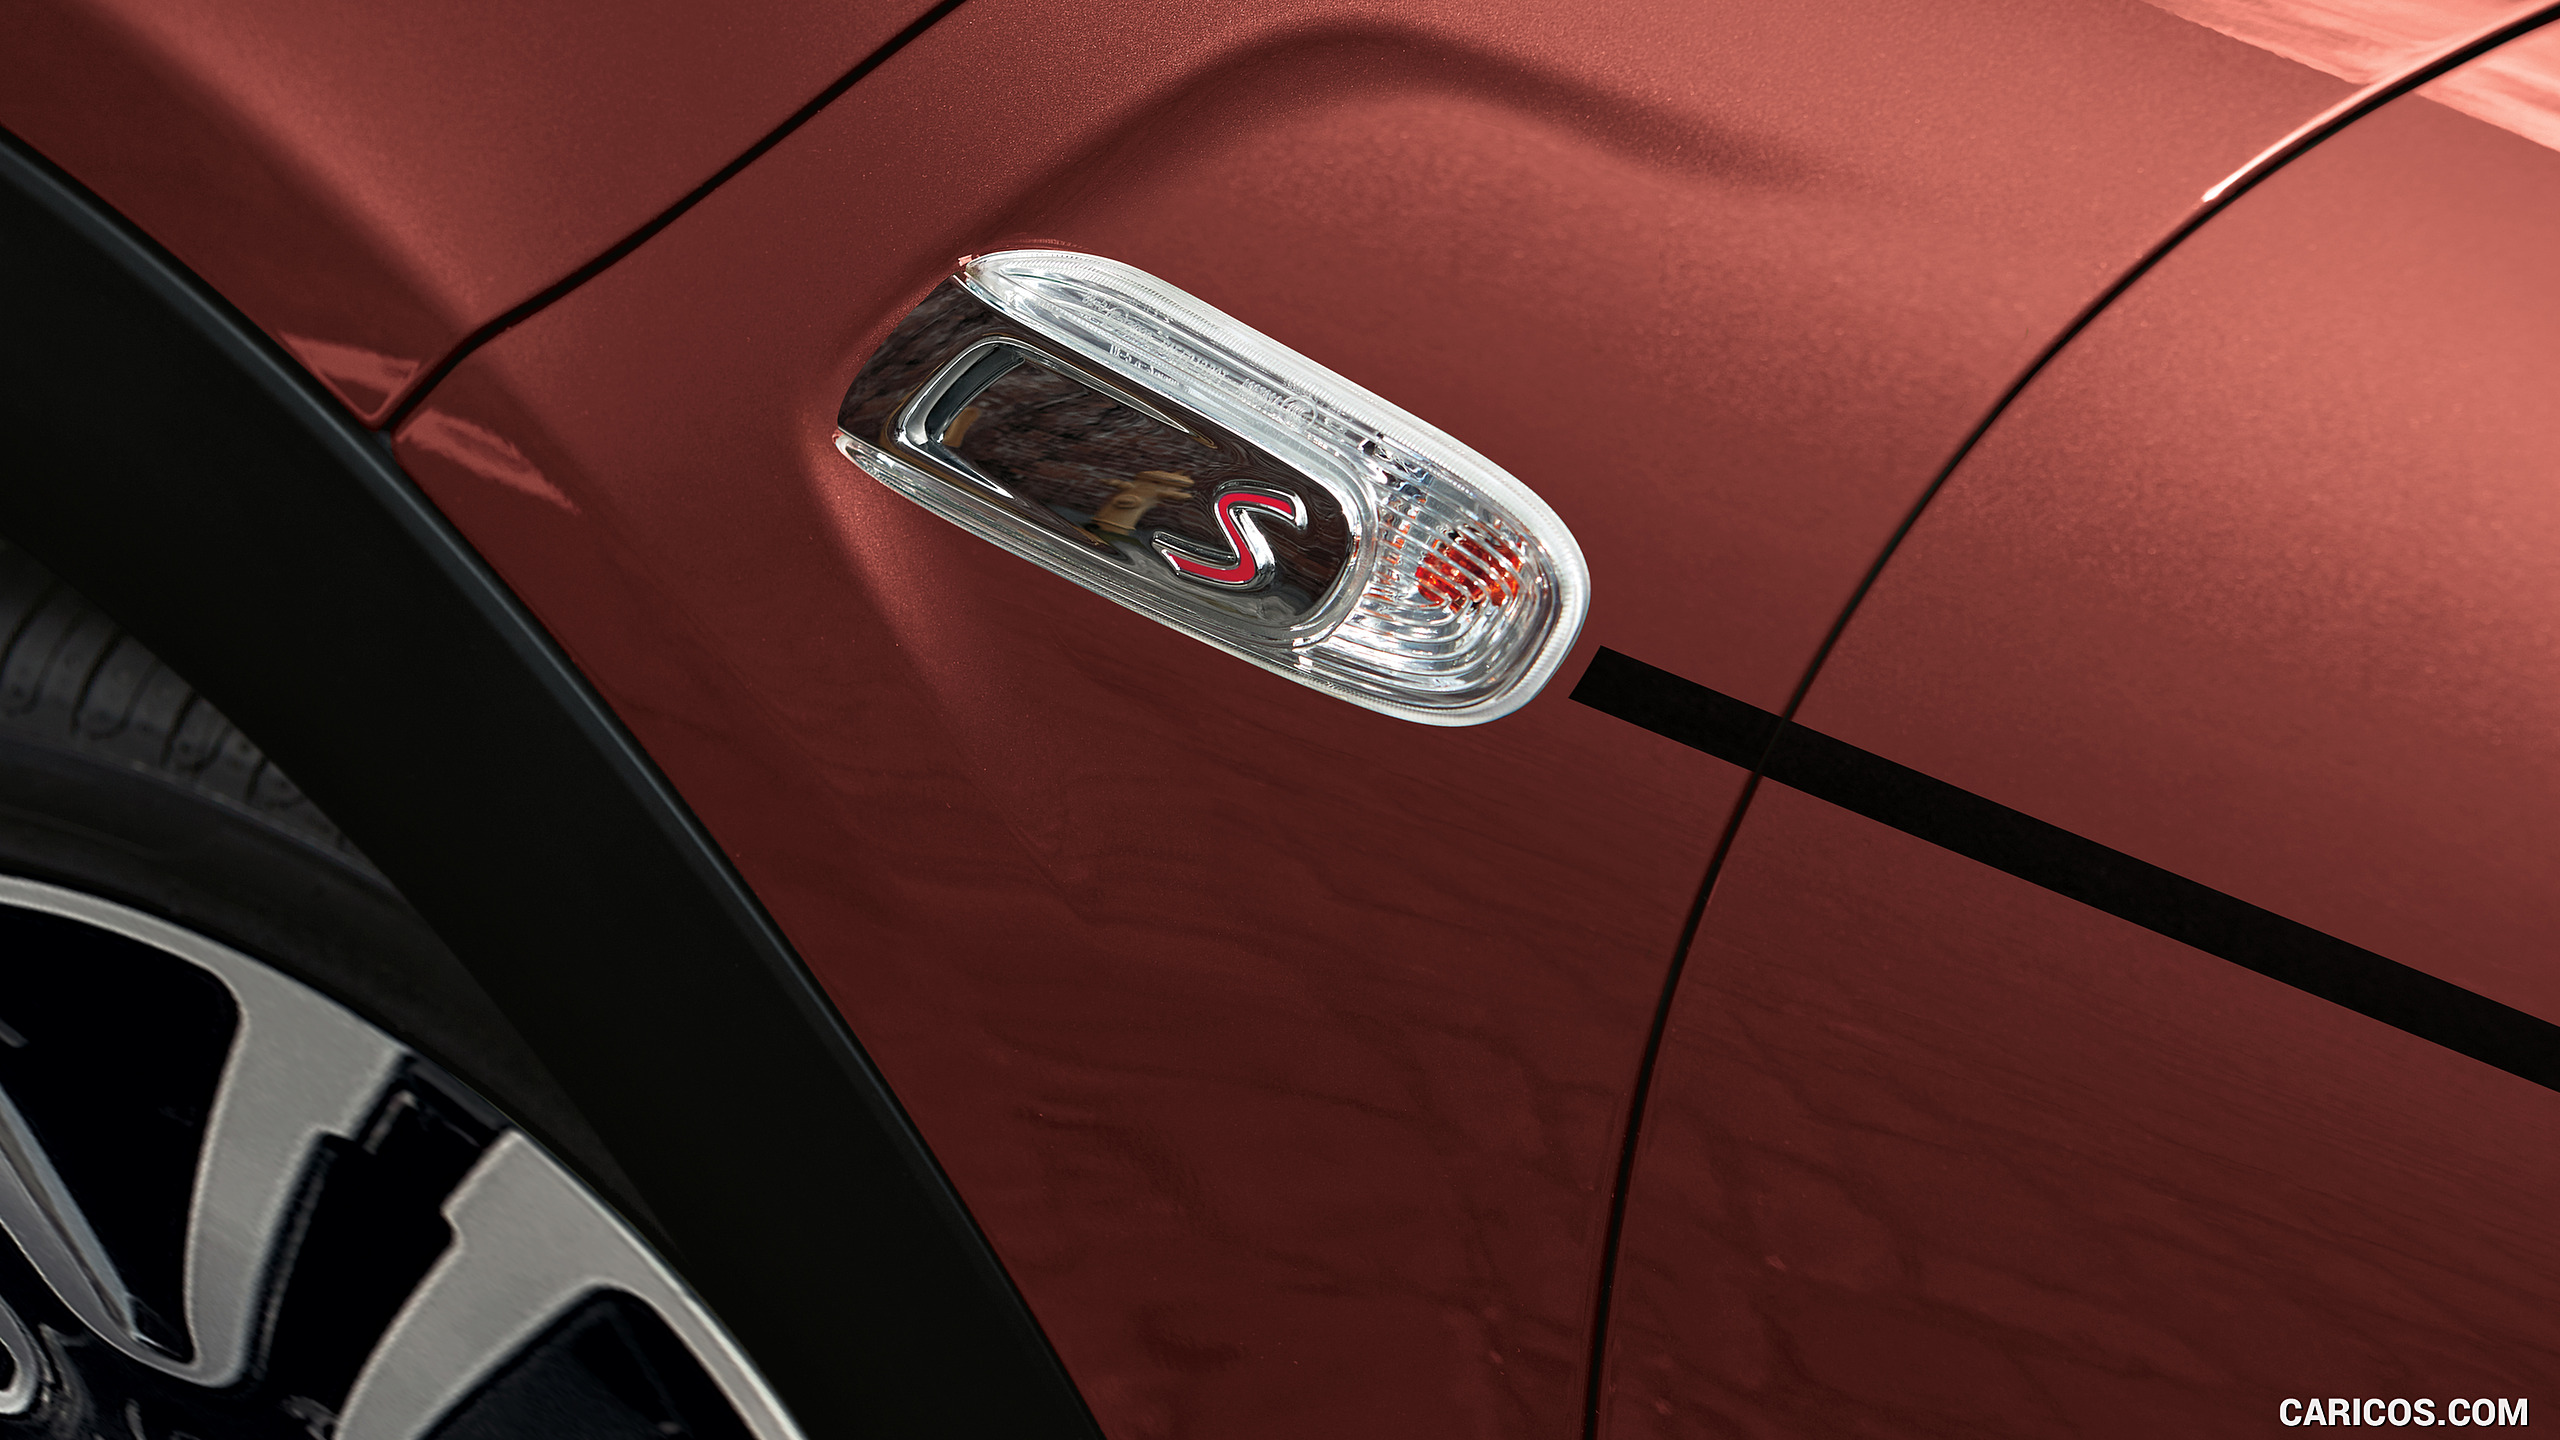 2021 MINI Coral Red Edition - Detail, #5 of 6